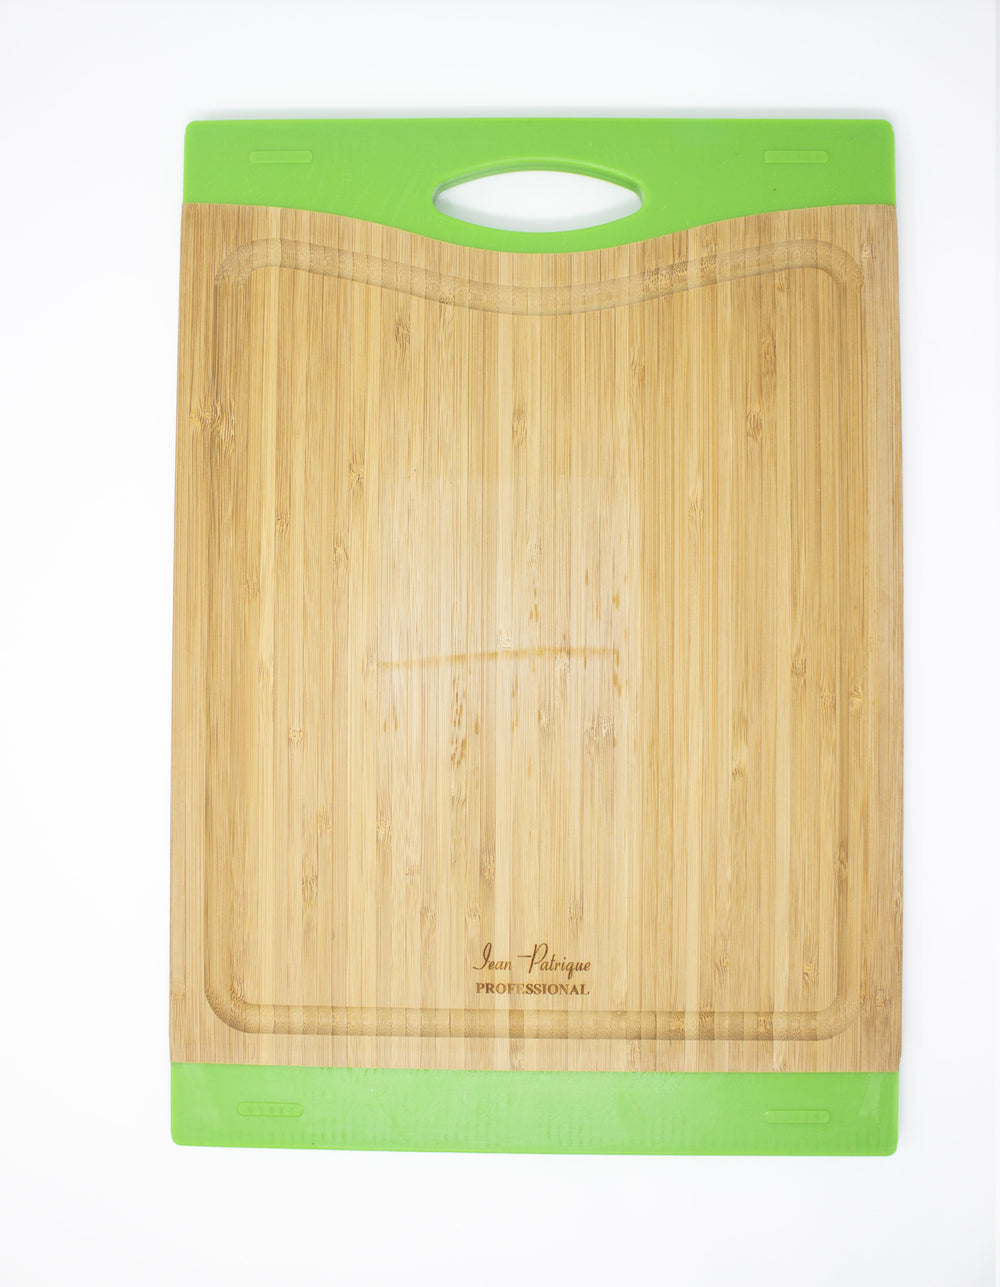 Oval Bamboo Chopping Board - by Jean Patrique